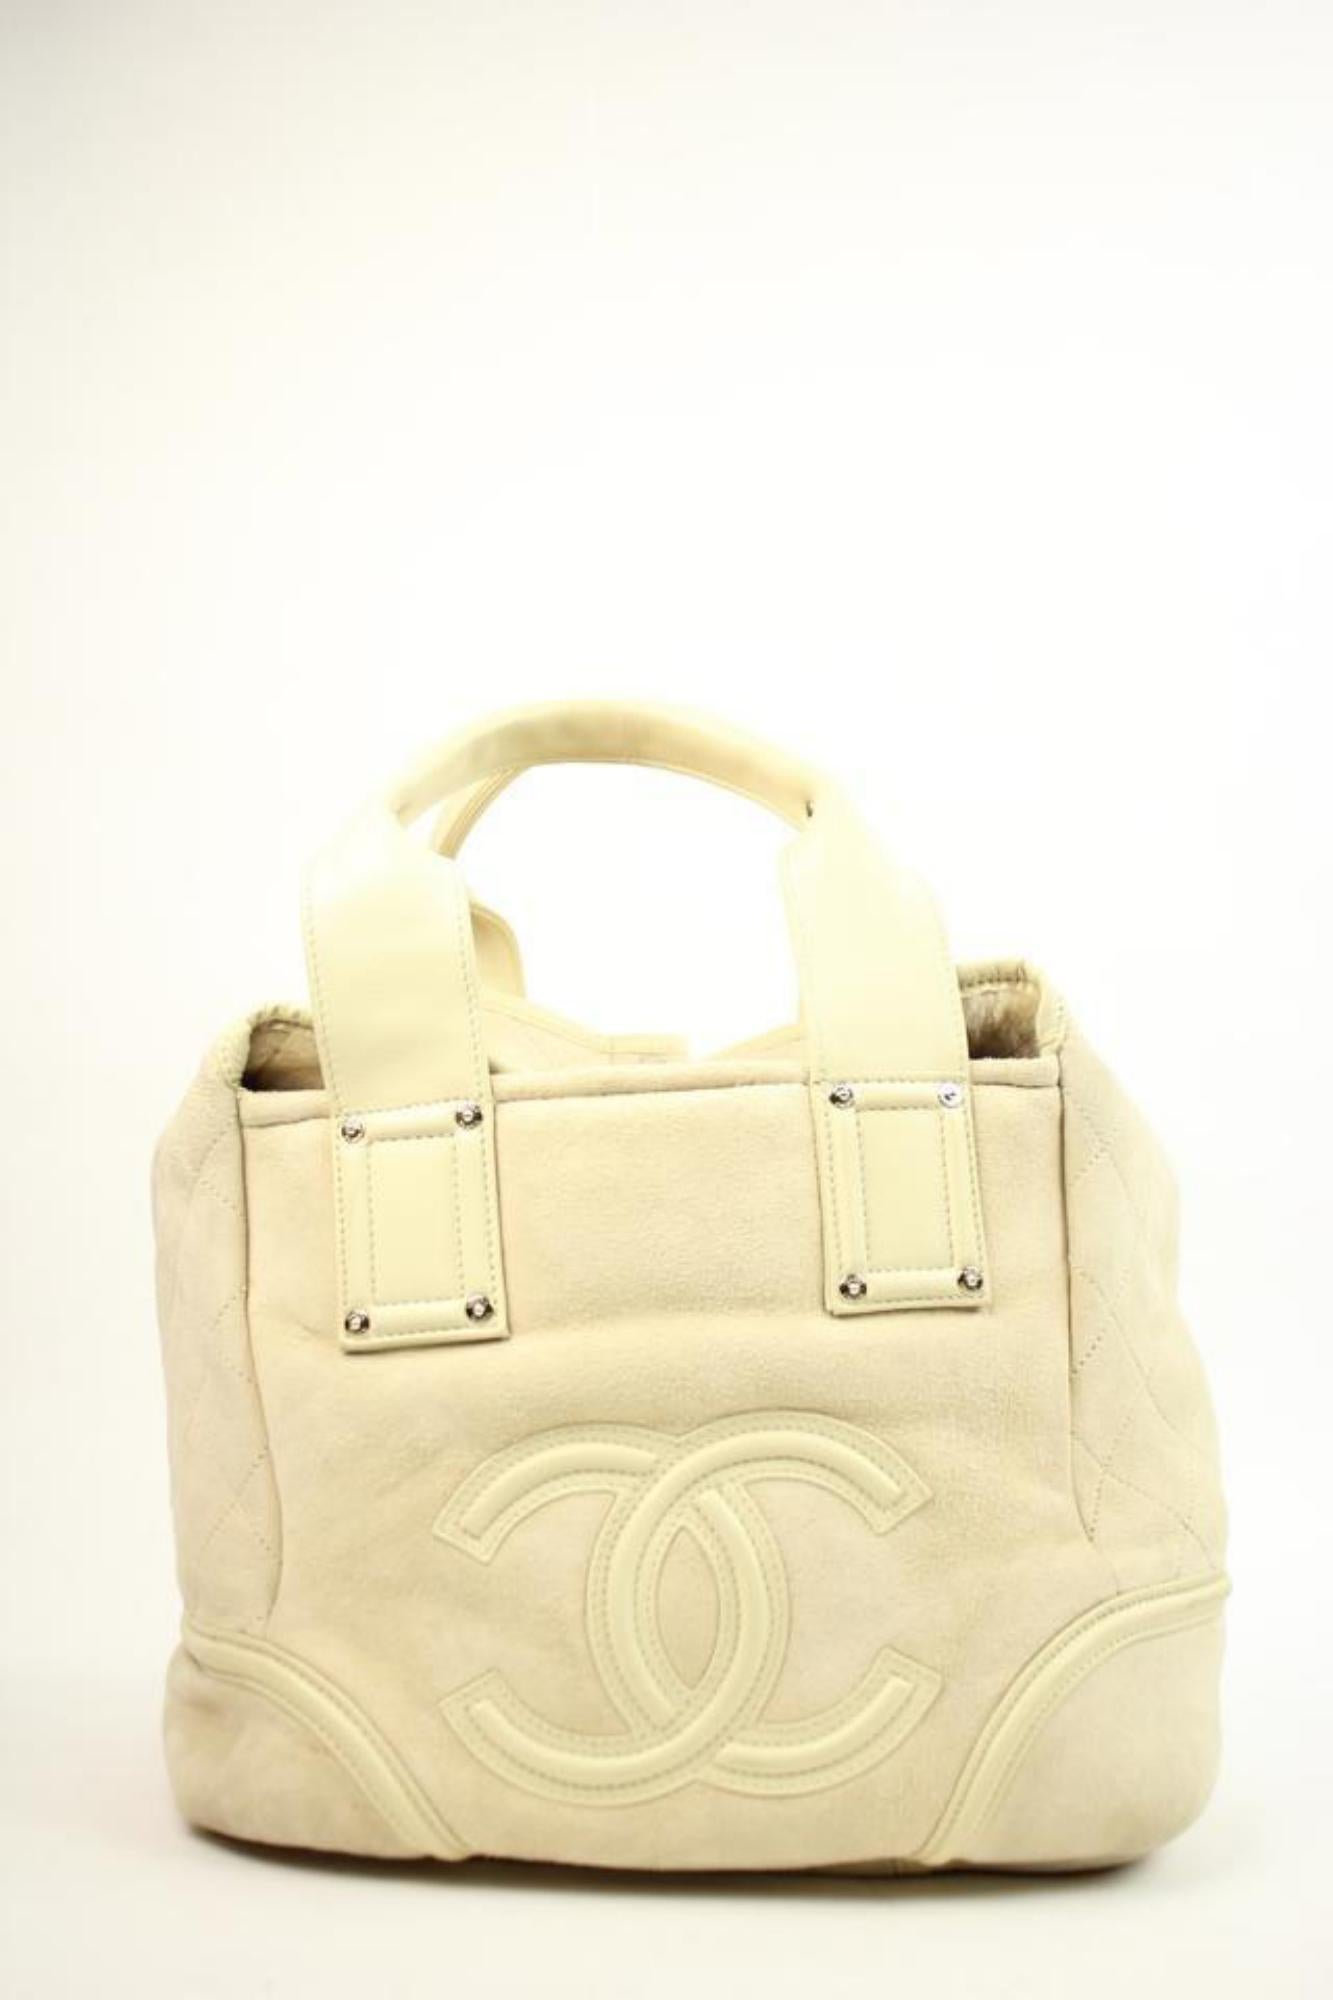 Chanel Convertible Fur Tote 37cca629 Beige Shearling Satchel For Sale 7